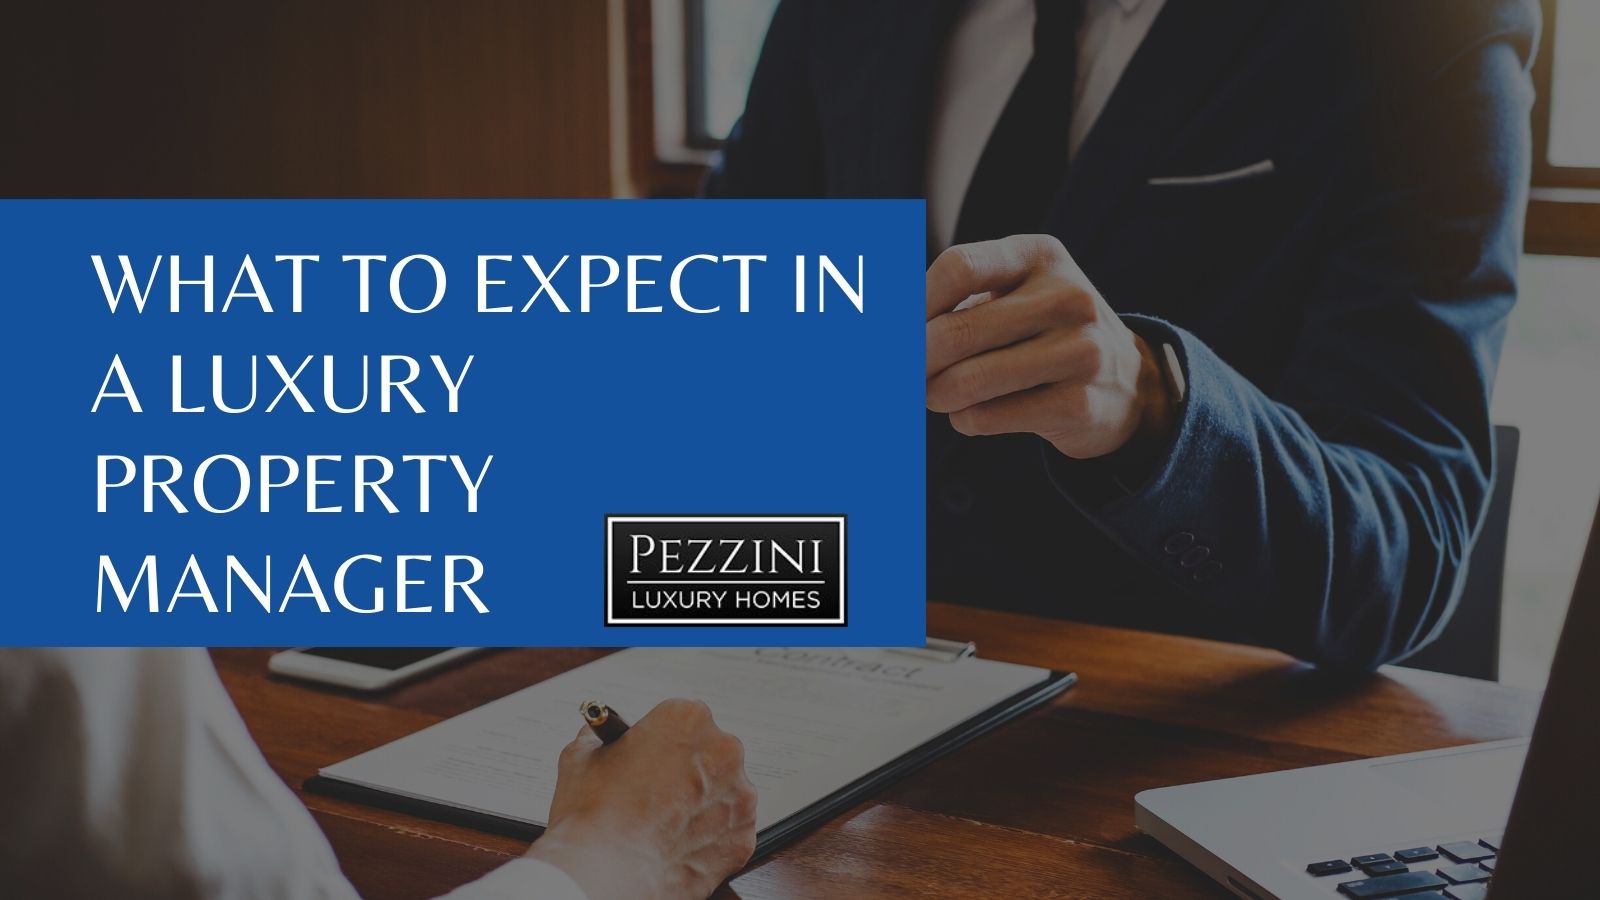 What to Expect in a Luxury Property Manager